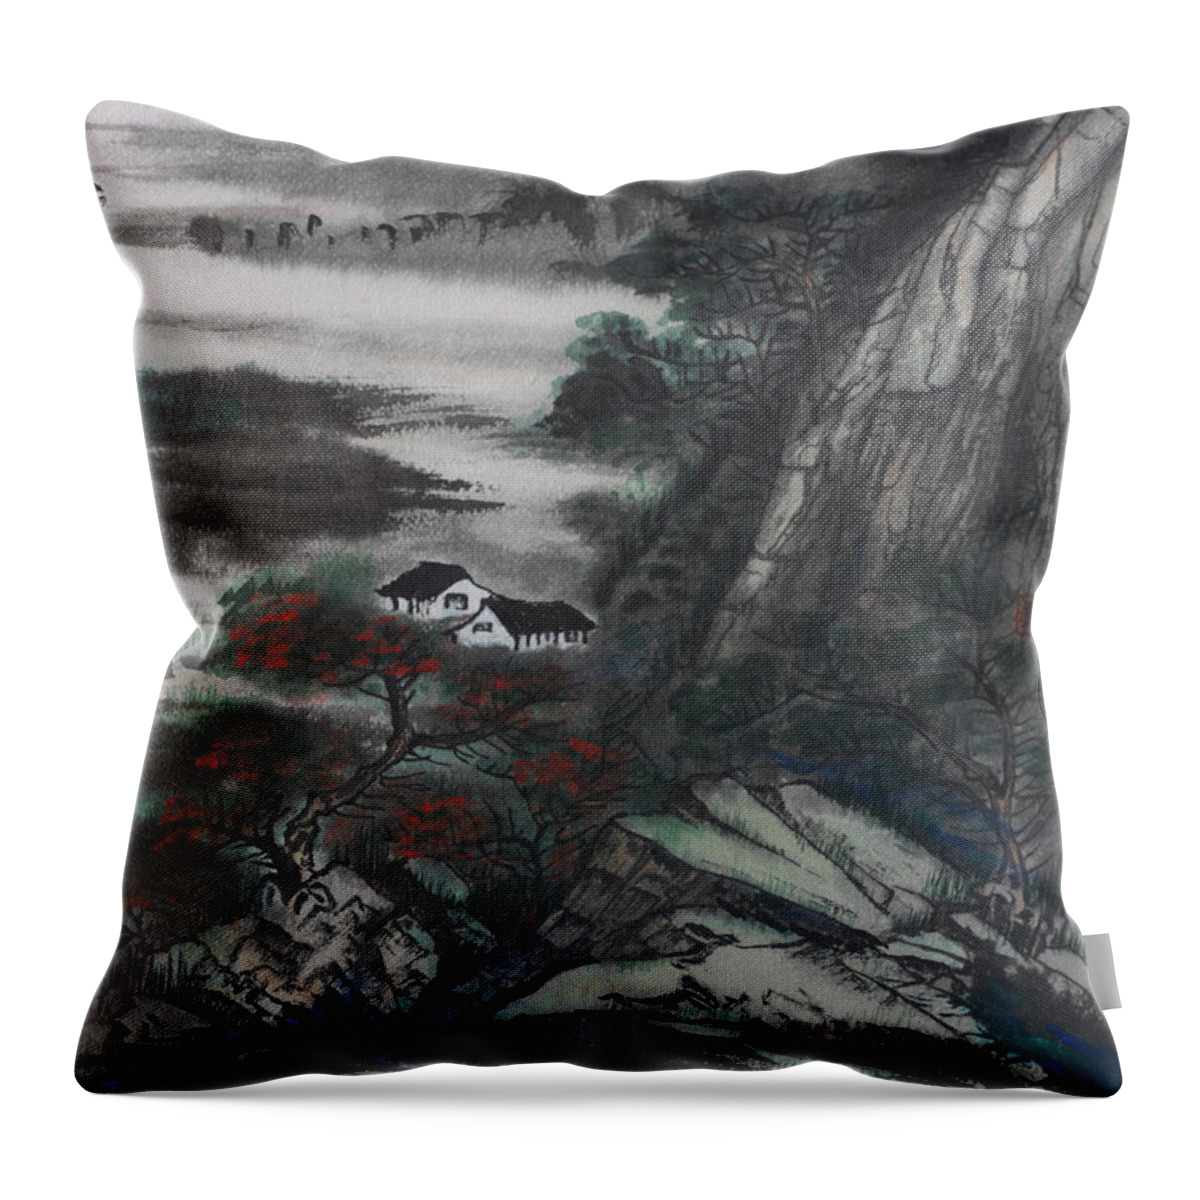 Chinese Watercolor Throw Pillow featuring the painting Houses by the River by Jenny Sanders